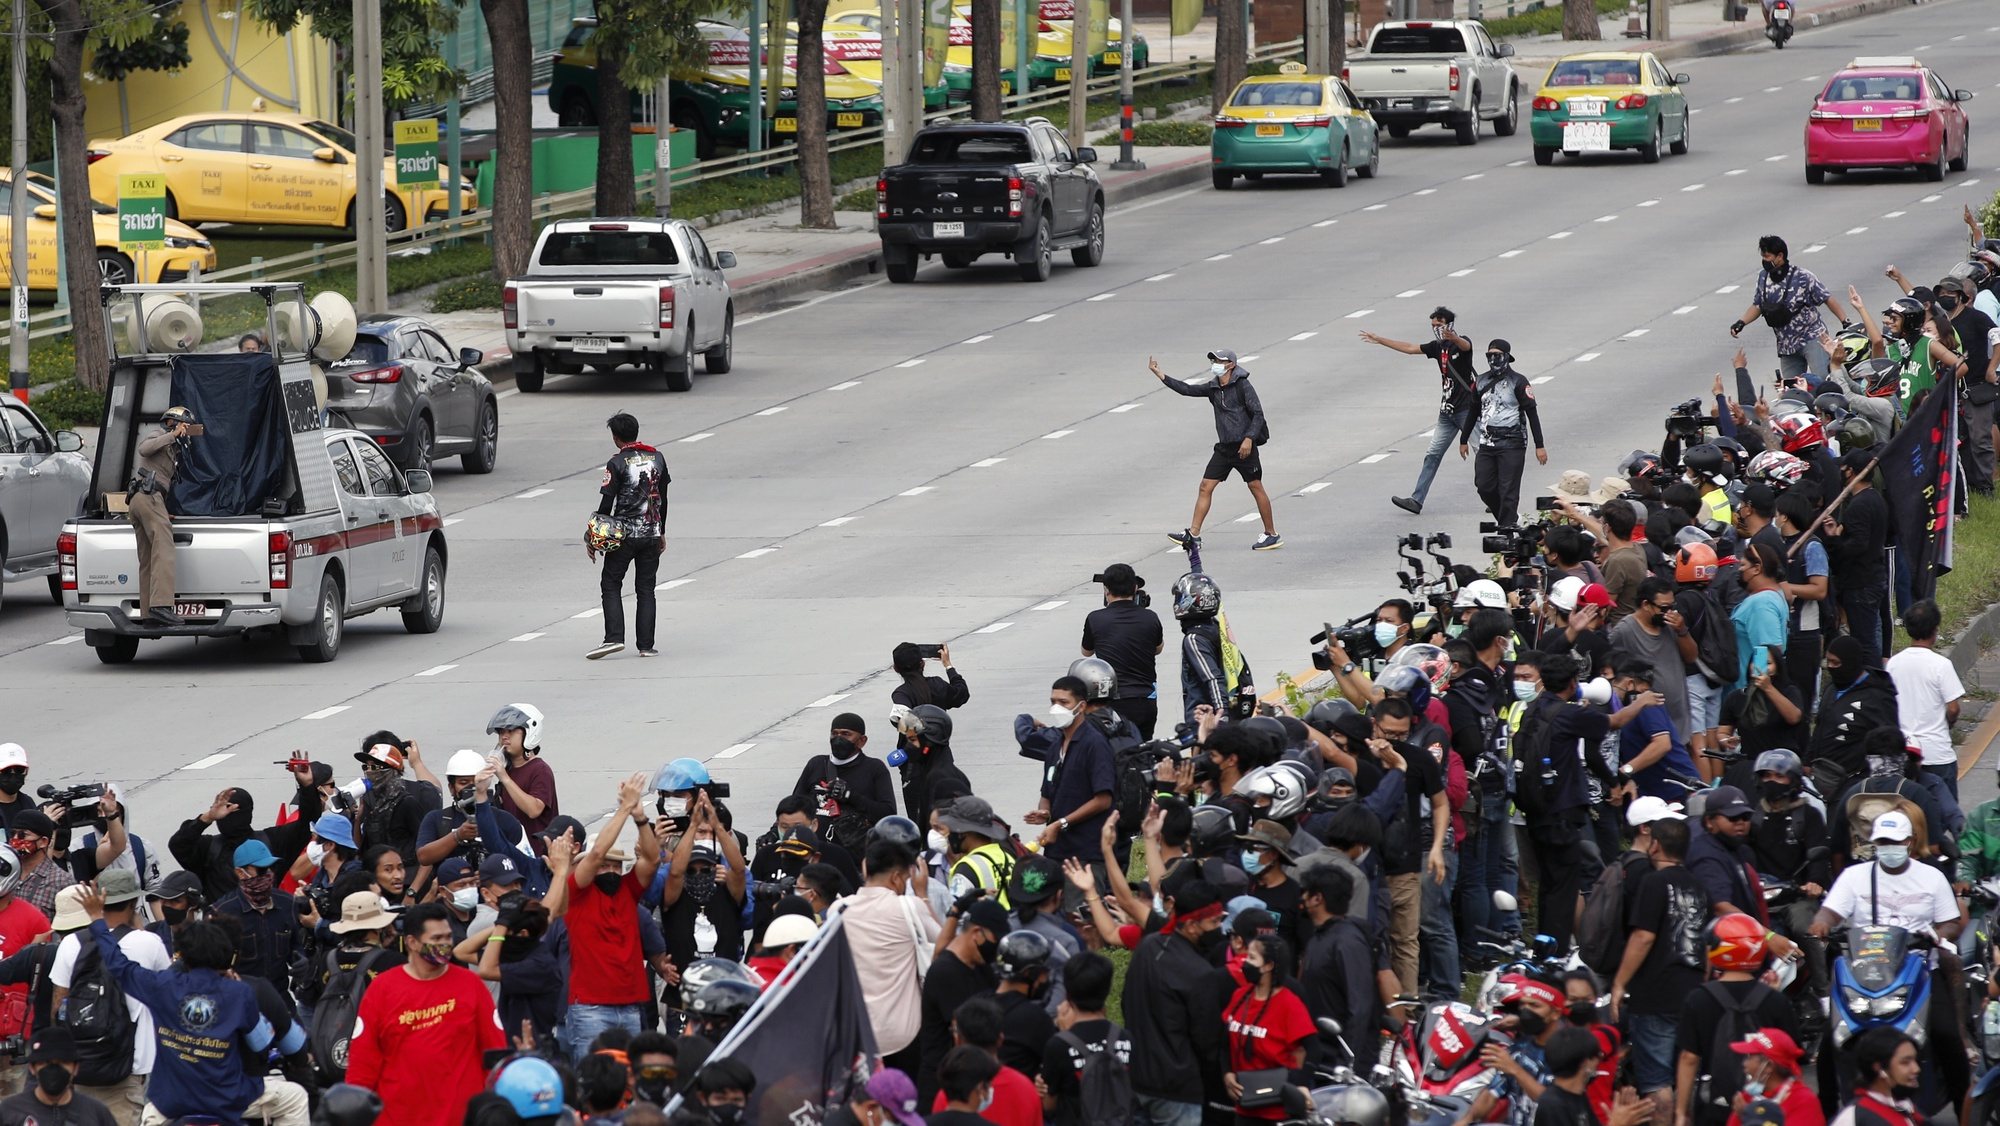 epa09434984 Anti-government protesters react to police officers (L) during a car mob rally calling for the resignation of the prime minister at a street in Bangkok, Thailand, 29 August 2021. Thousands of anti-government protesters ride their vehicles and blaring horns in a car mob convoy calling for the ouster of the prime minister over the government&#039;s failure in handling the COVID-19 crisis.  EPA/RUNGROJ YONGRIT